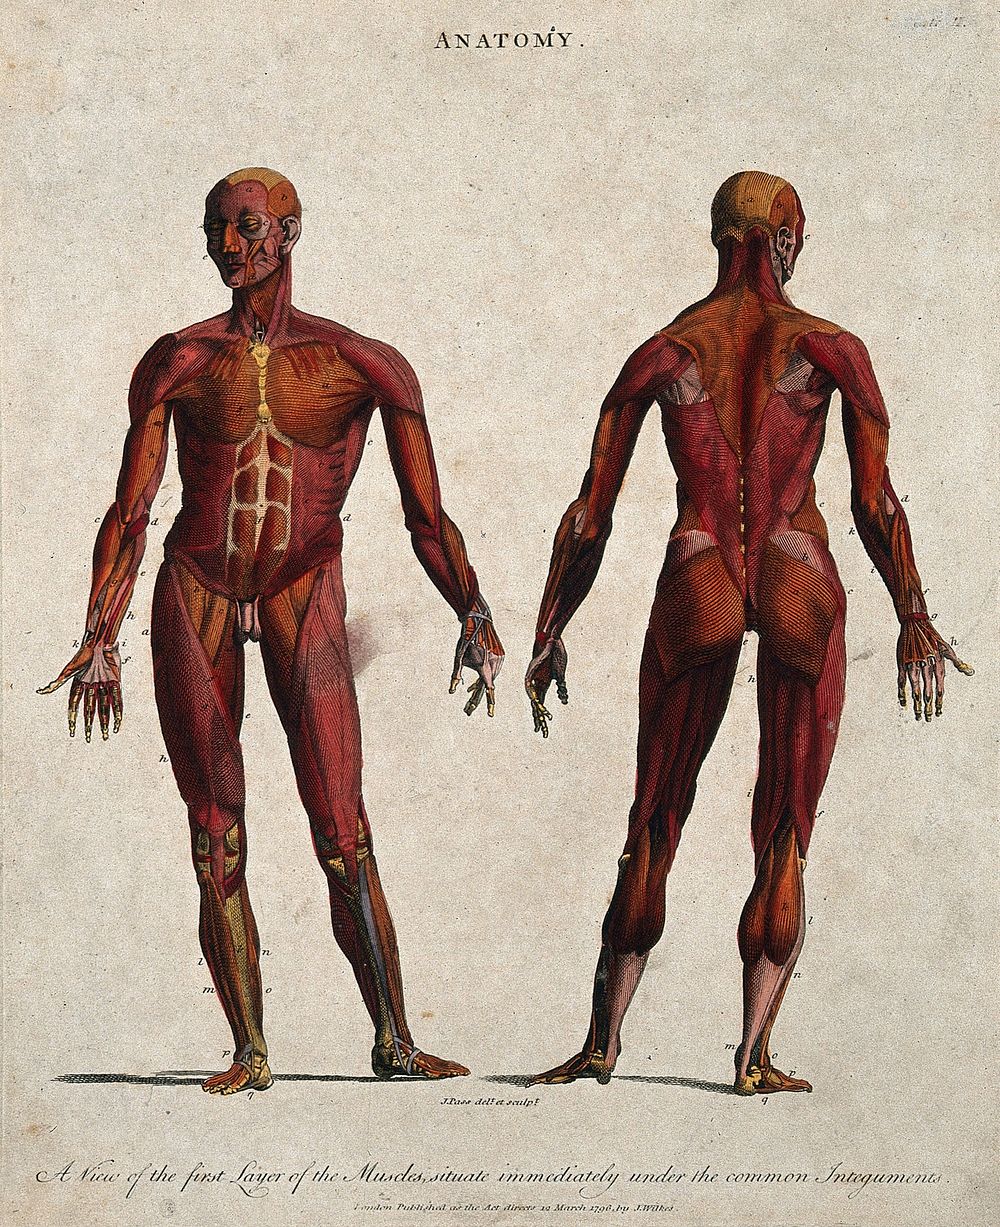 An écorché showing the first layer of muscles: front and back views. Coloured line engraving by J. Pass, 1796.